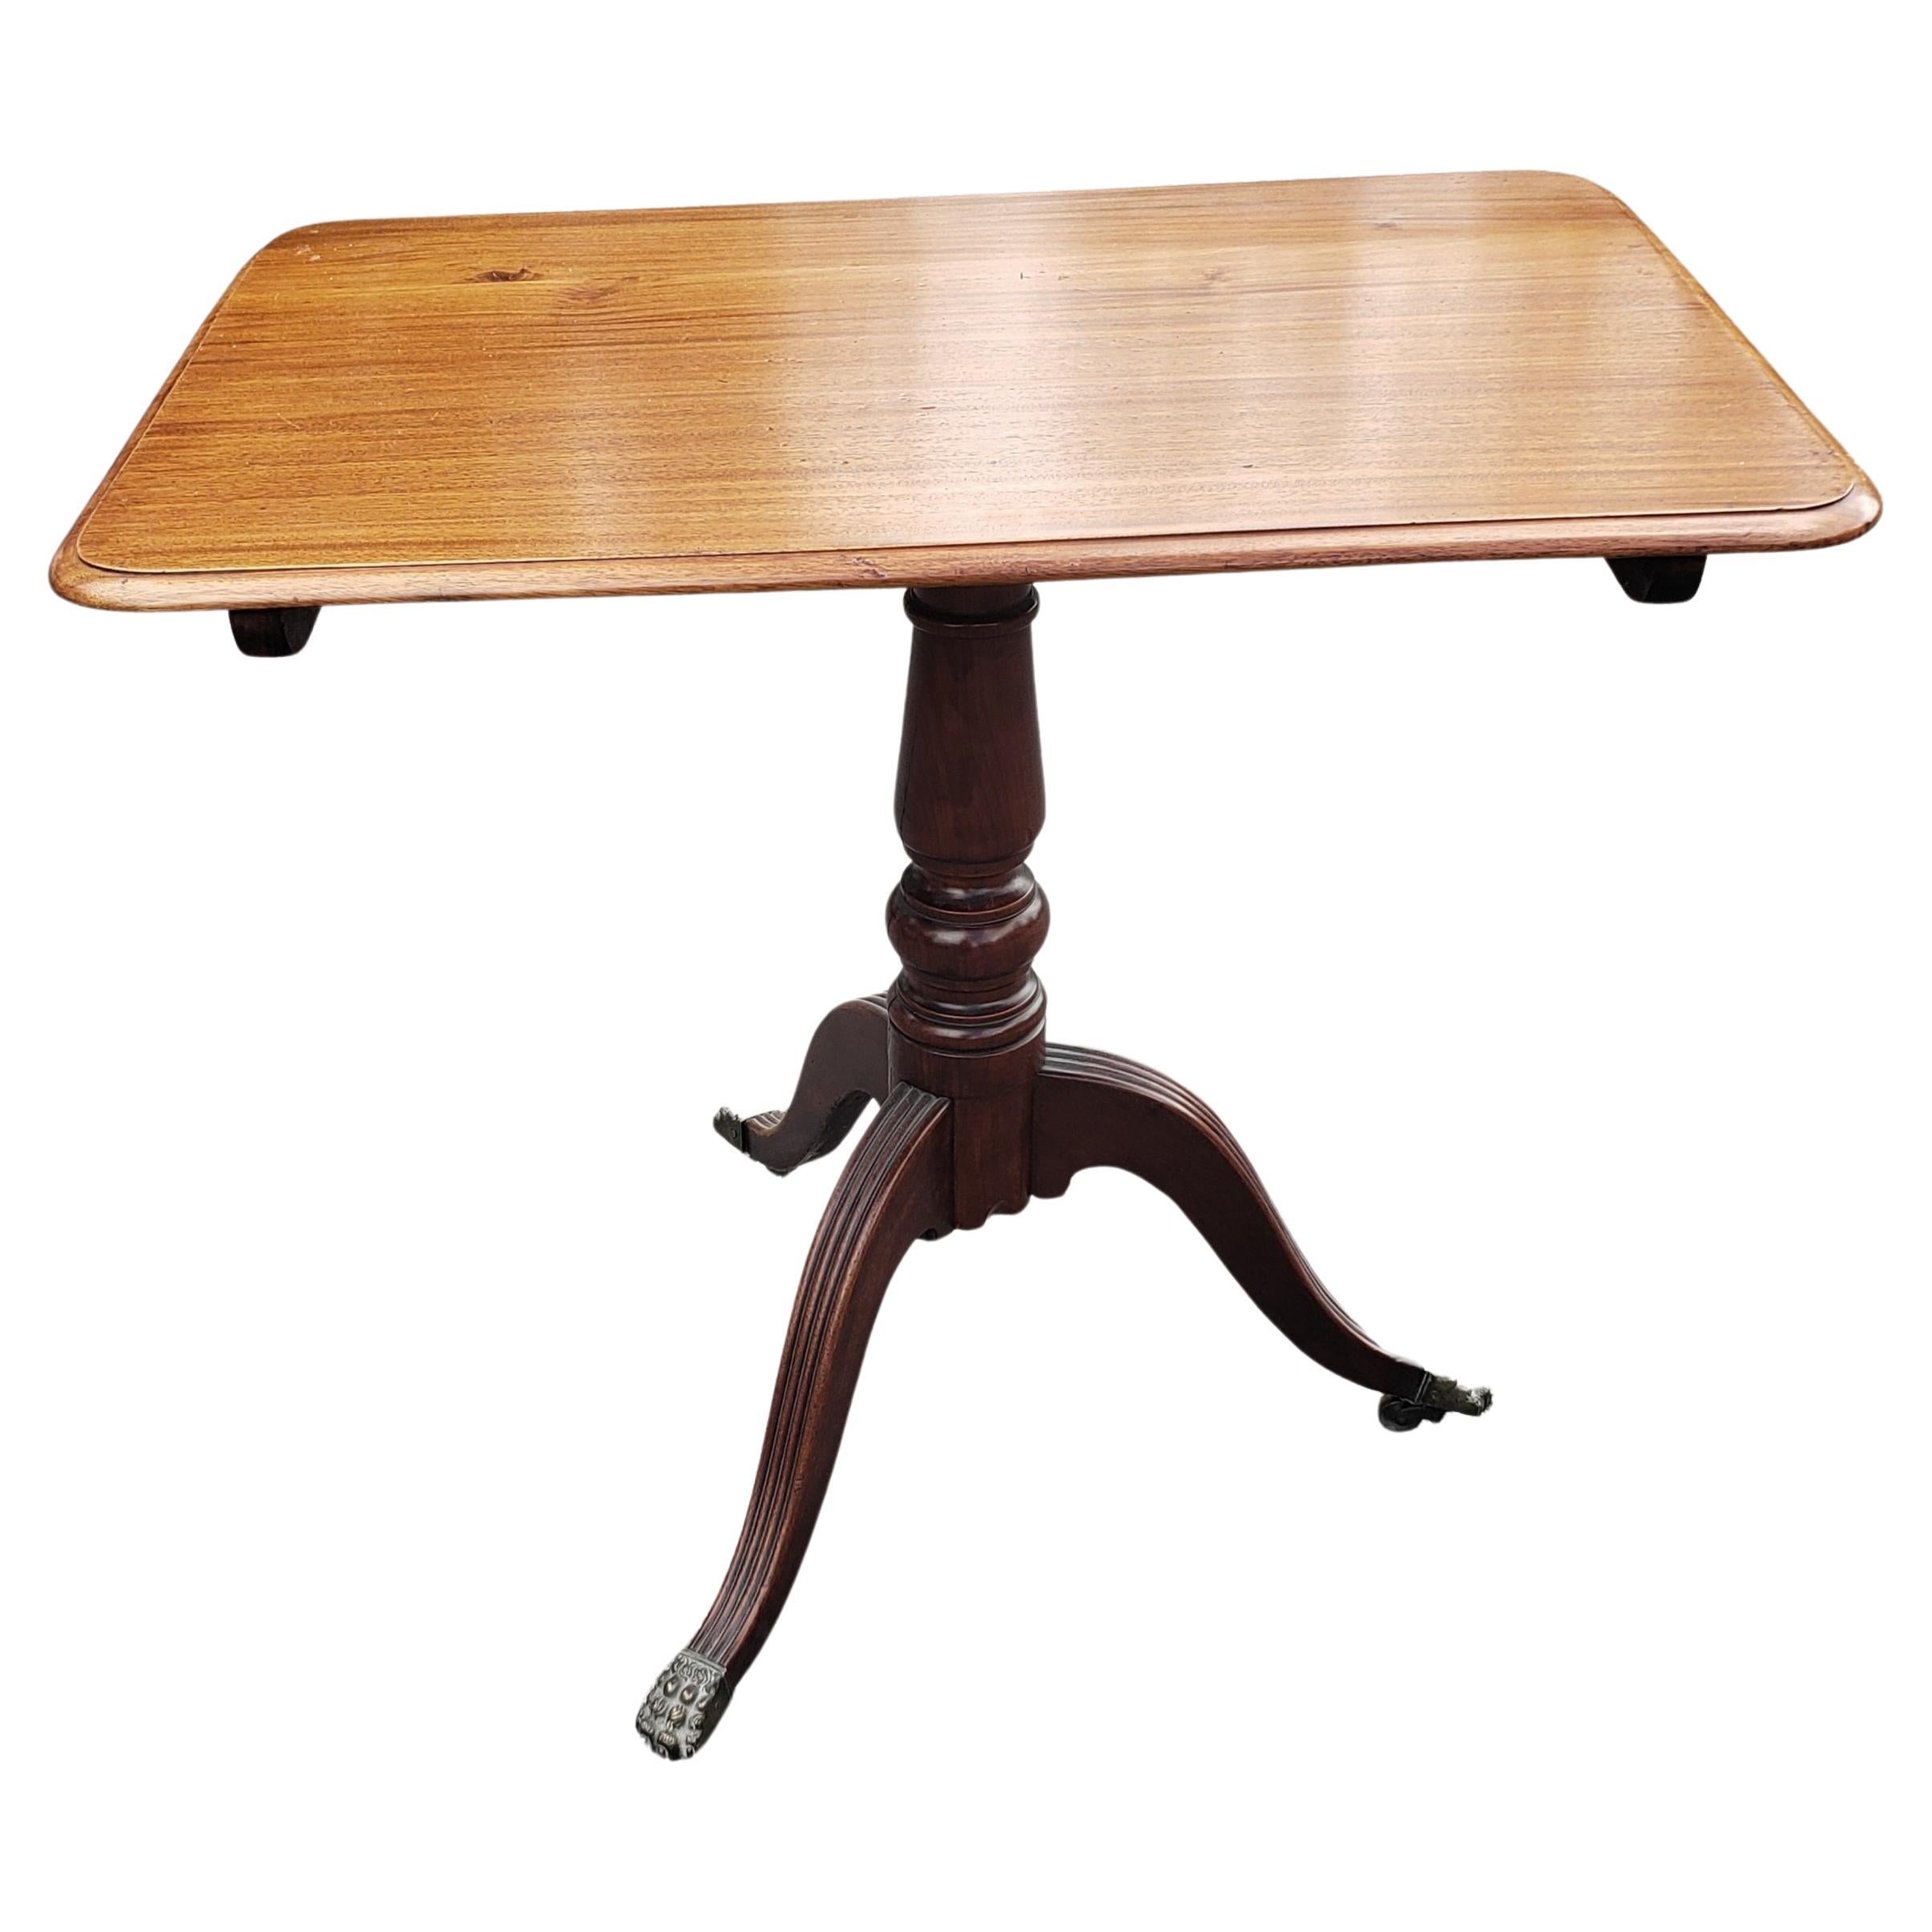 A 1930s Regency Mahogany Tilt-Top Tea Table with Brass Paw Feet on Wheels in very good vintage condition. Table has been recently refinished and looks and feel great. Measures 30